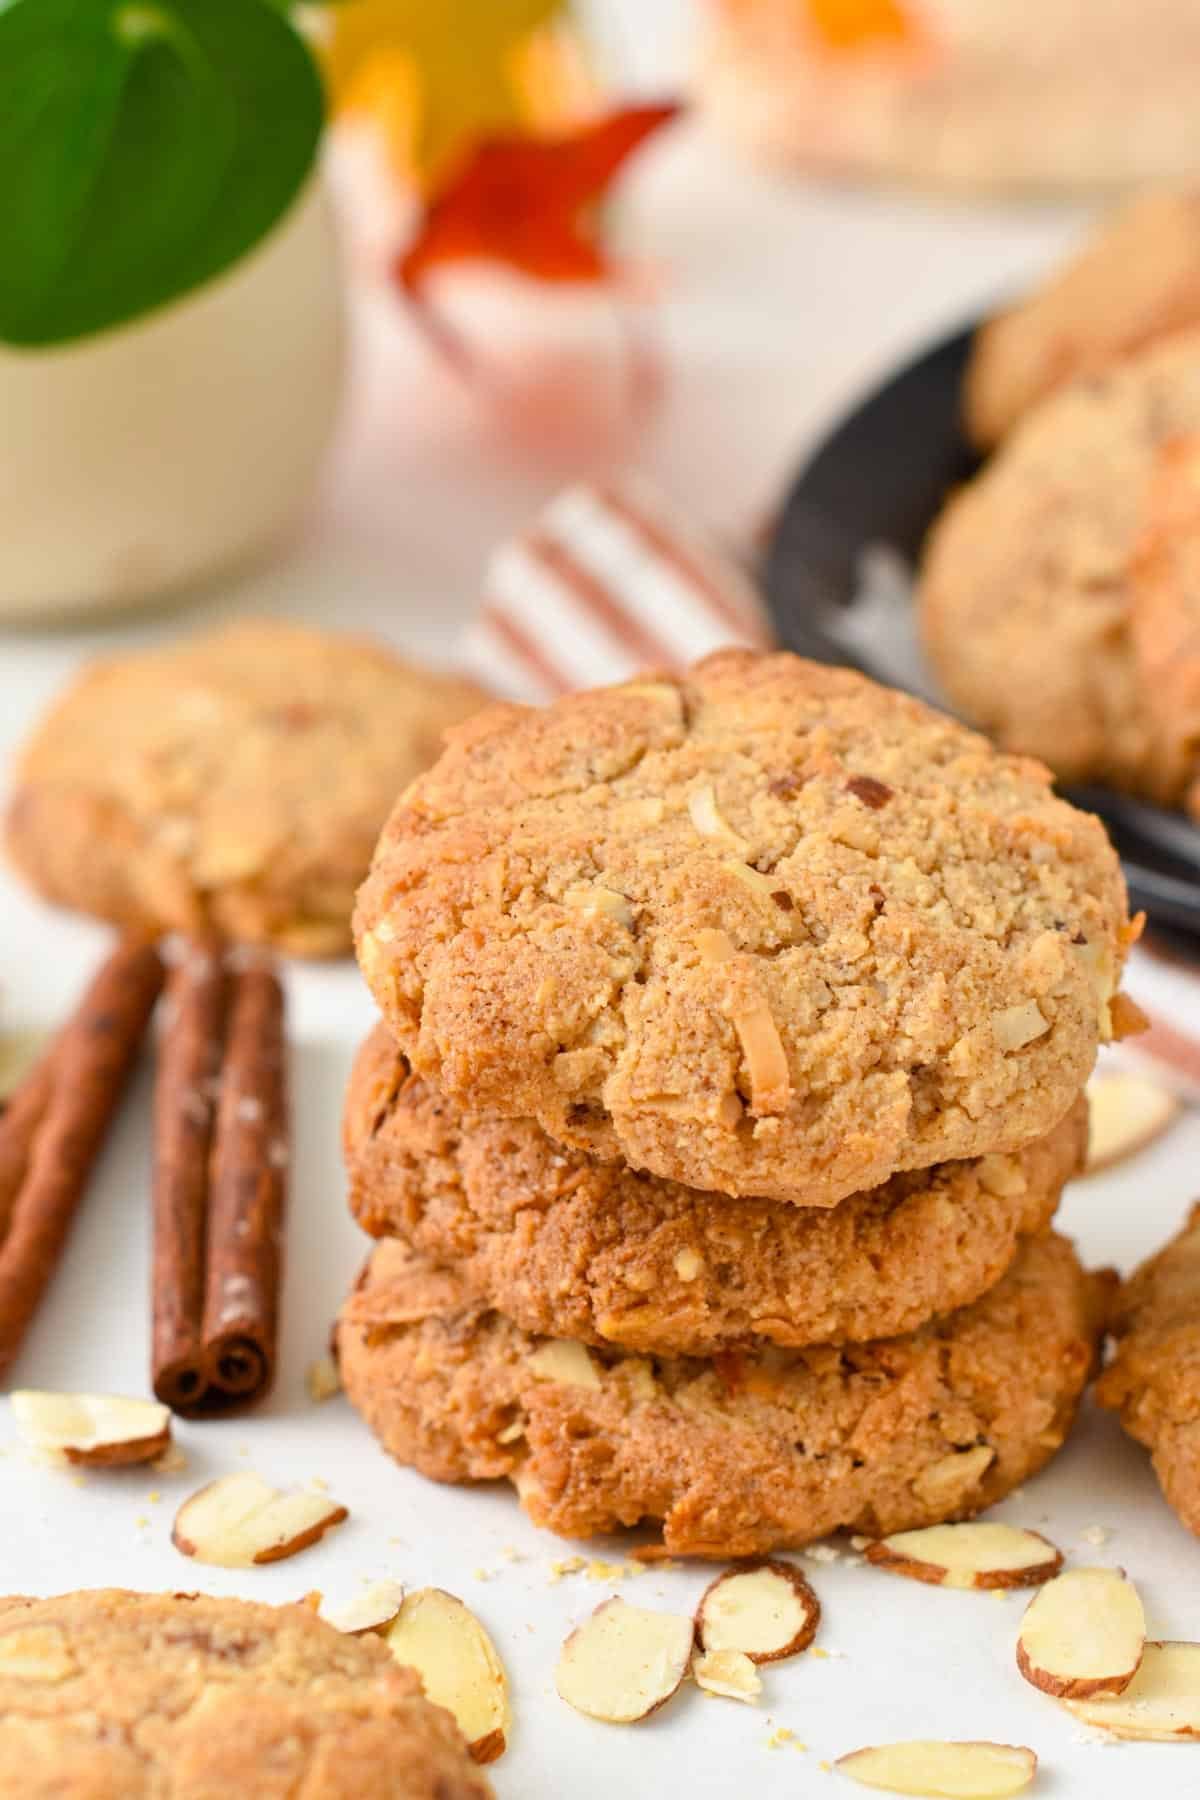 A stack of three keto oatmeal cookies made with cinnamon stick on sides and slices almonds.